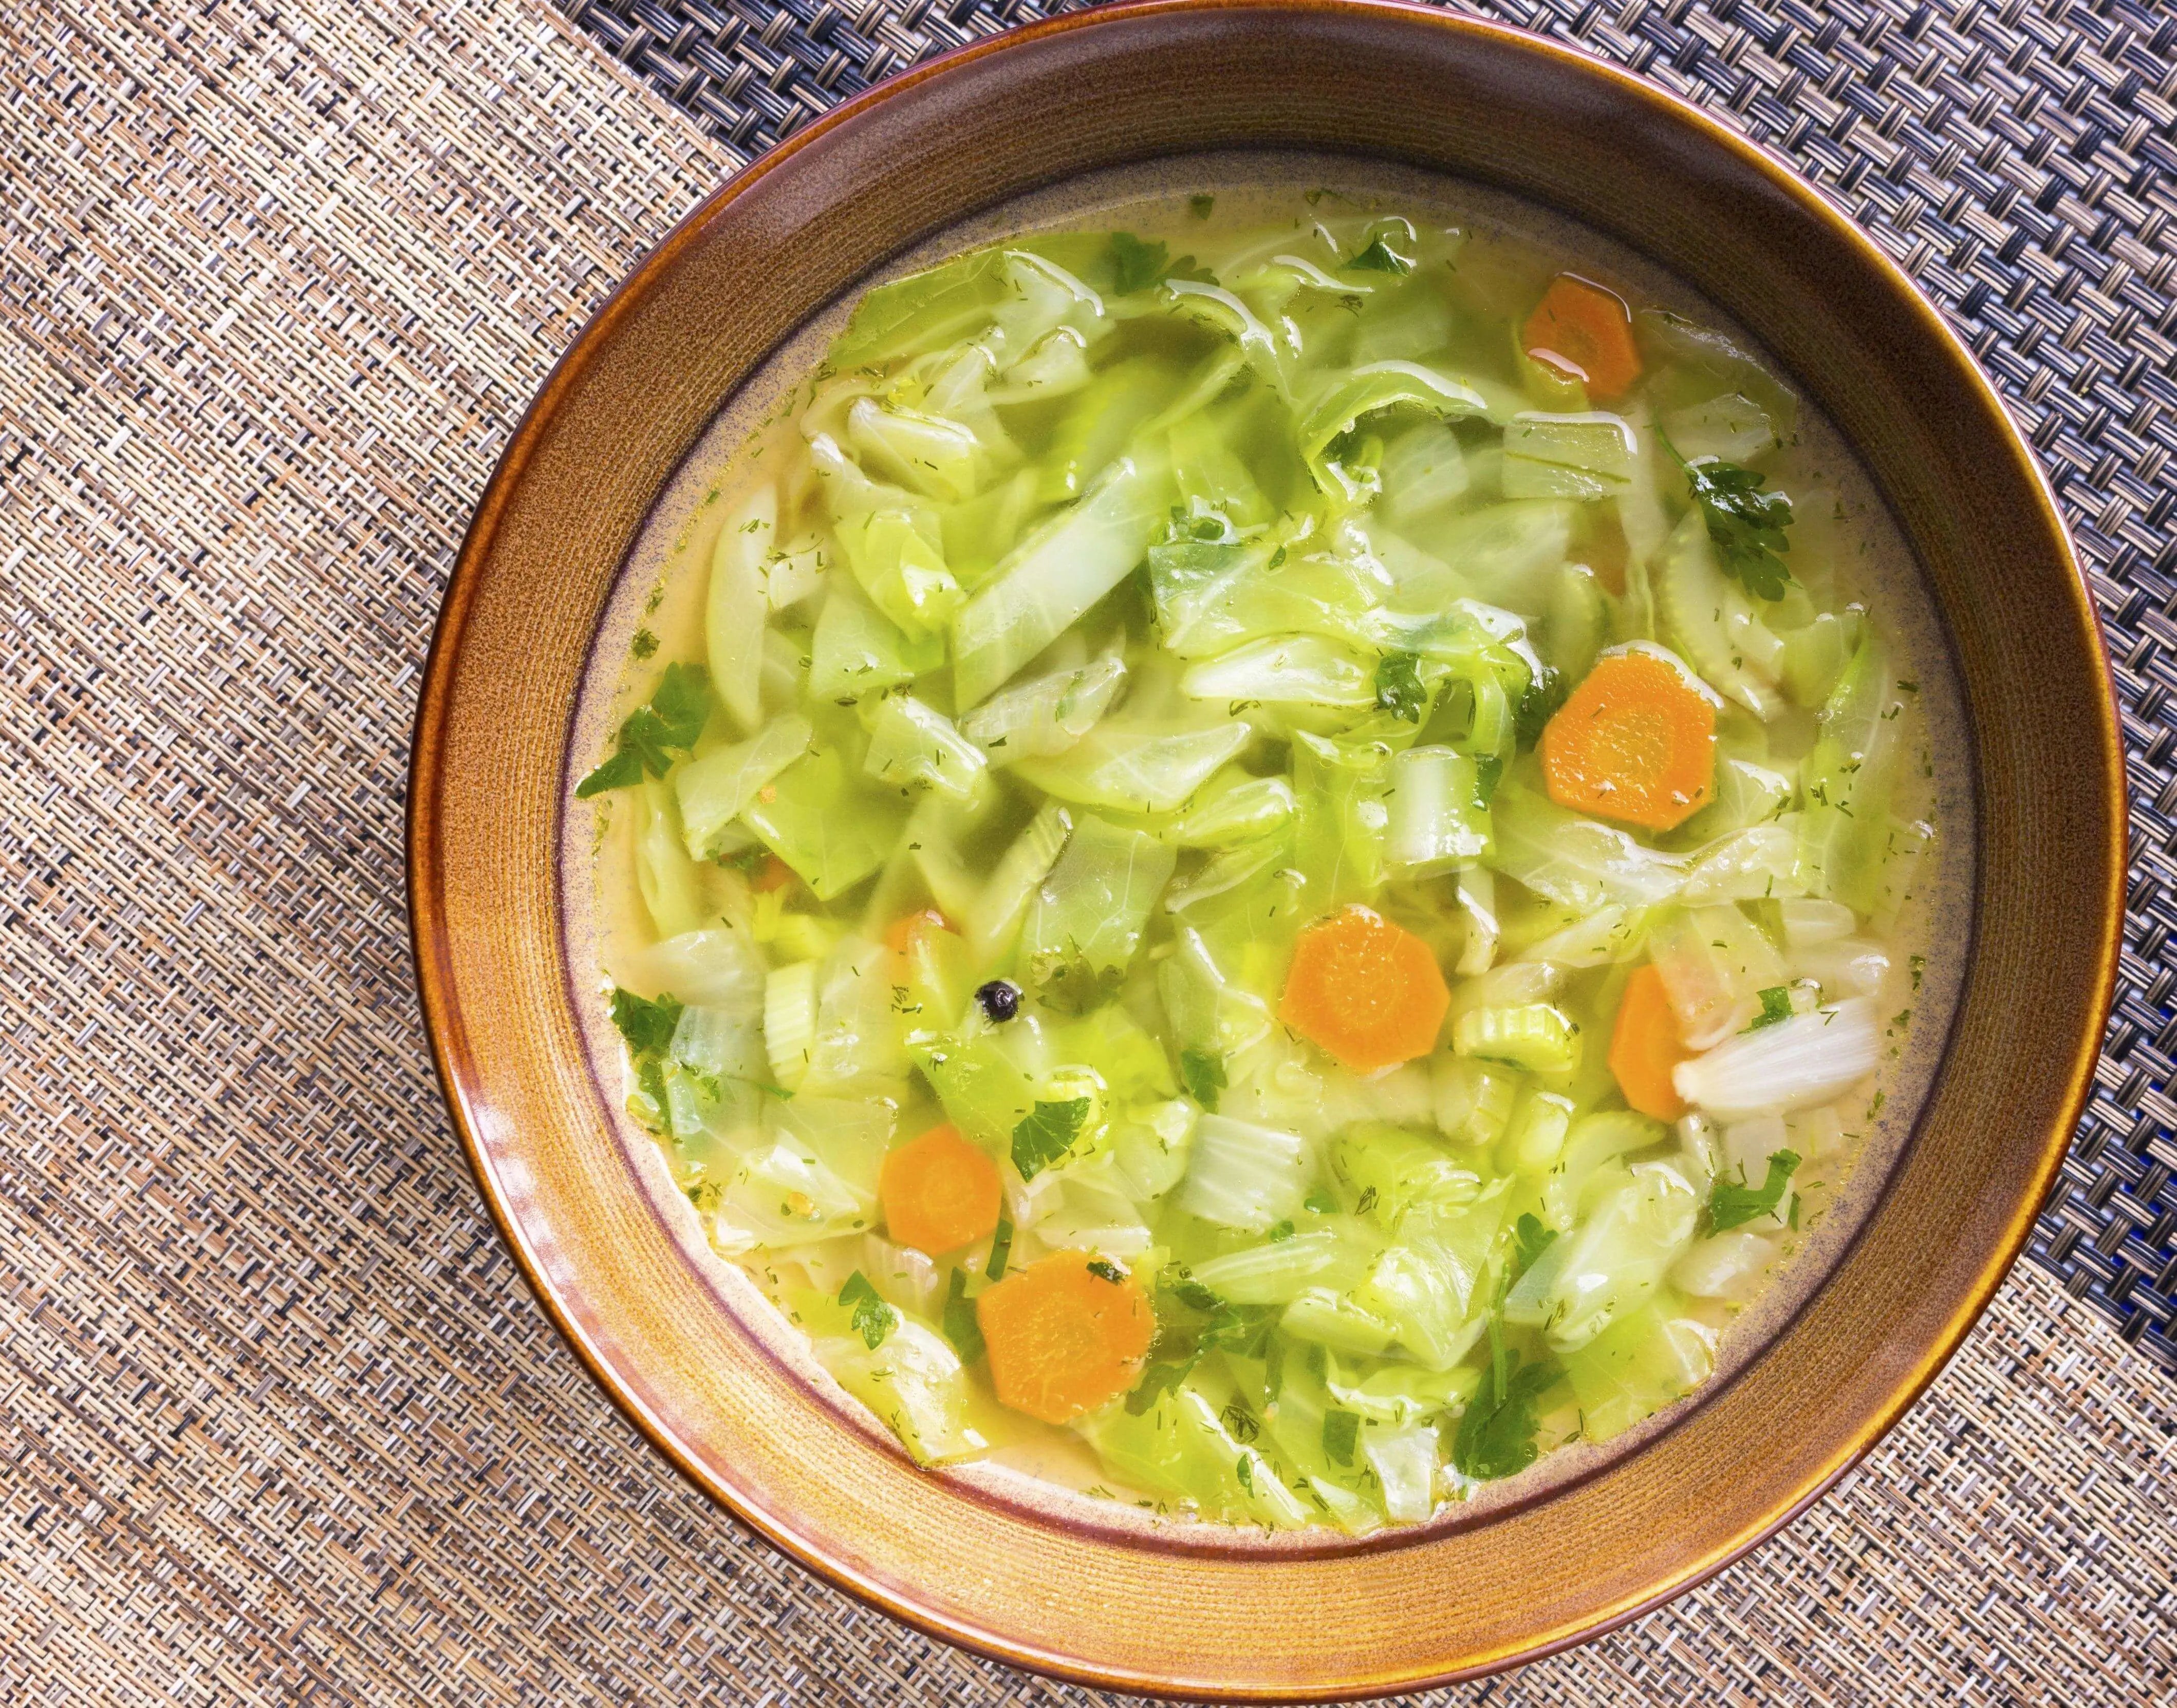 The-Cabbage-Soup-Diet-Does-It-Work-Is-It-Safe The Rike